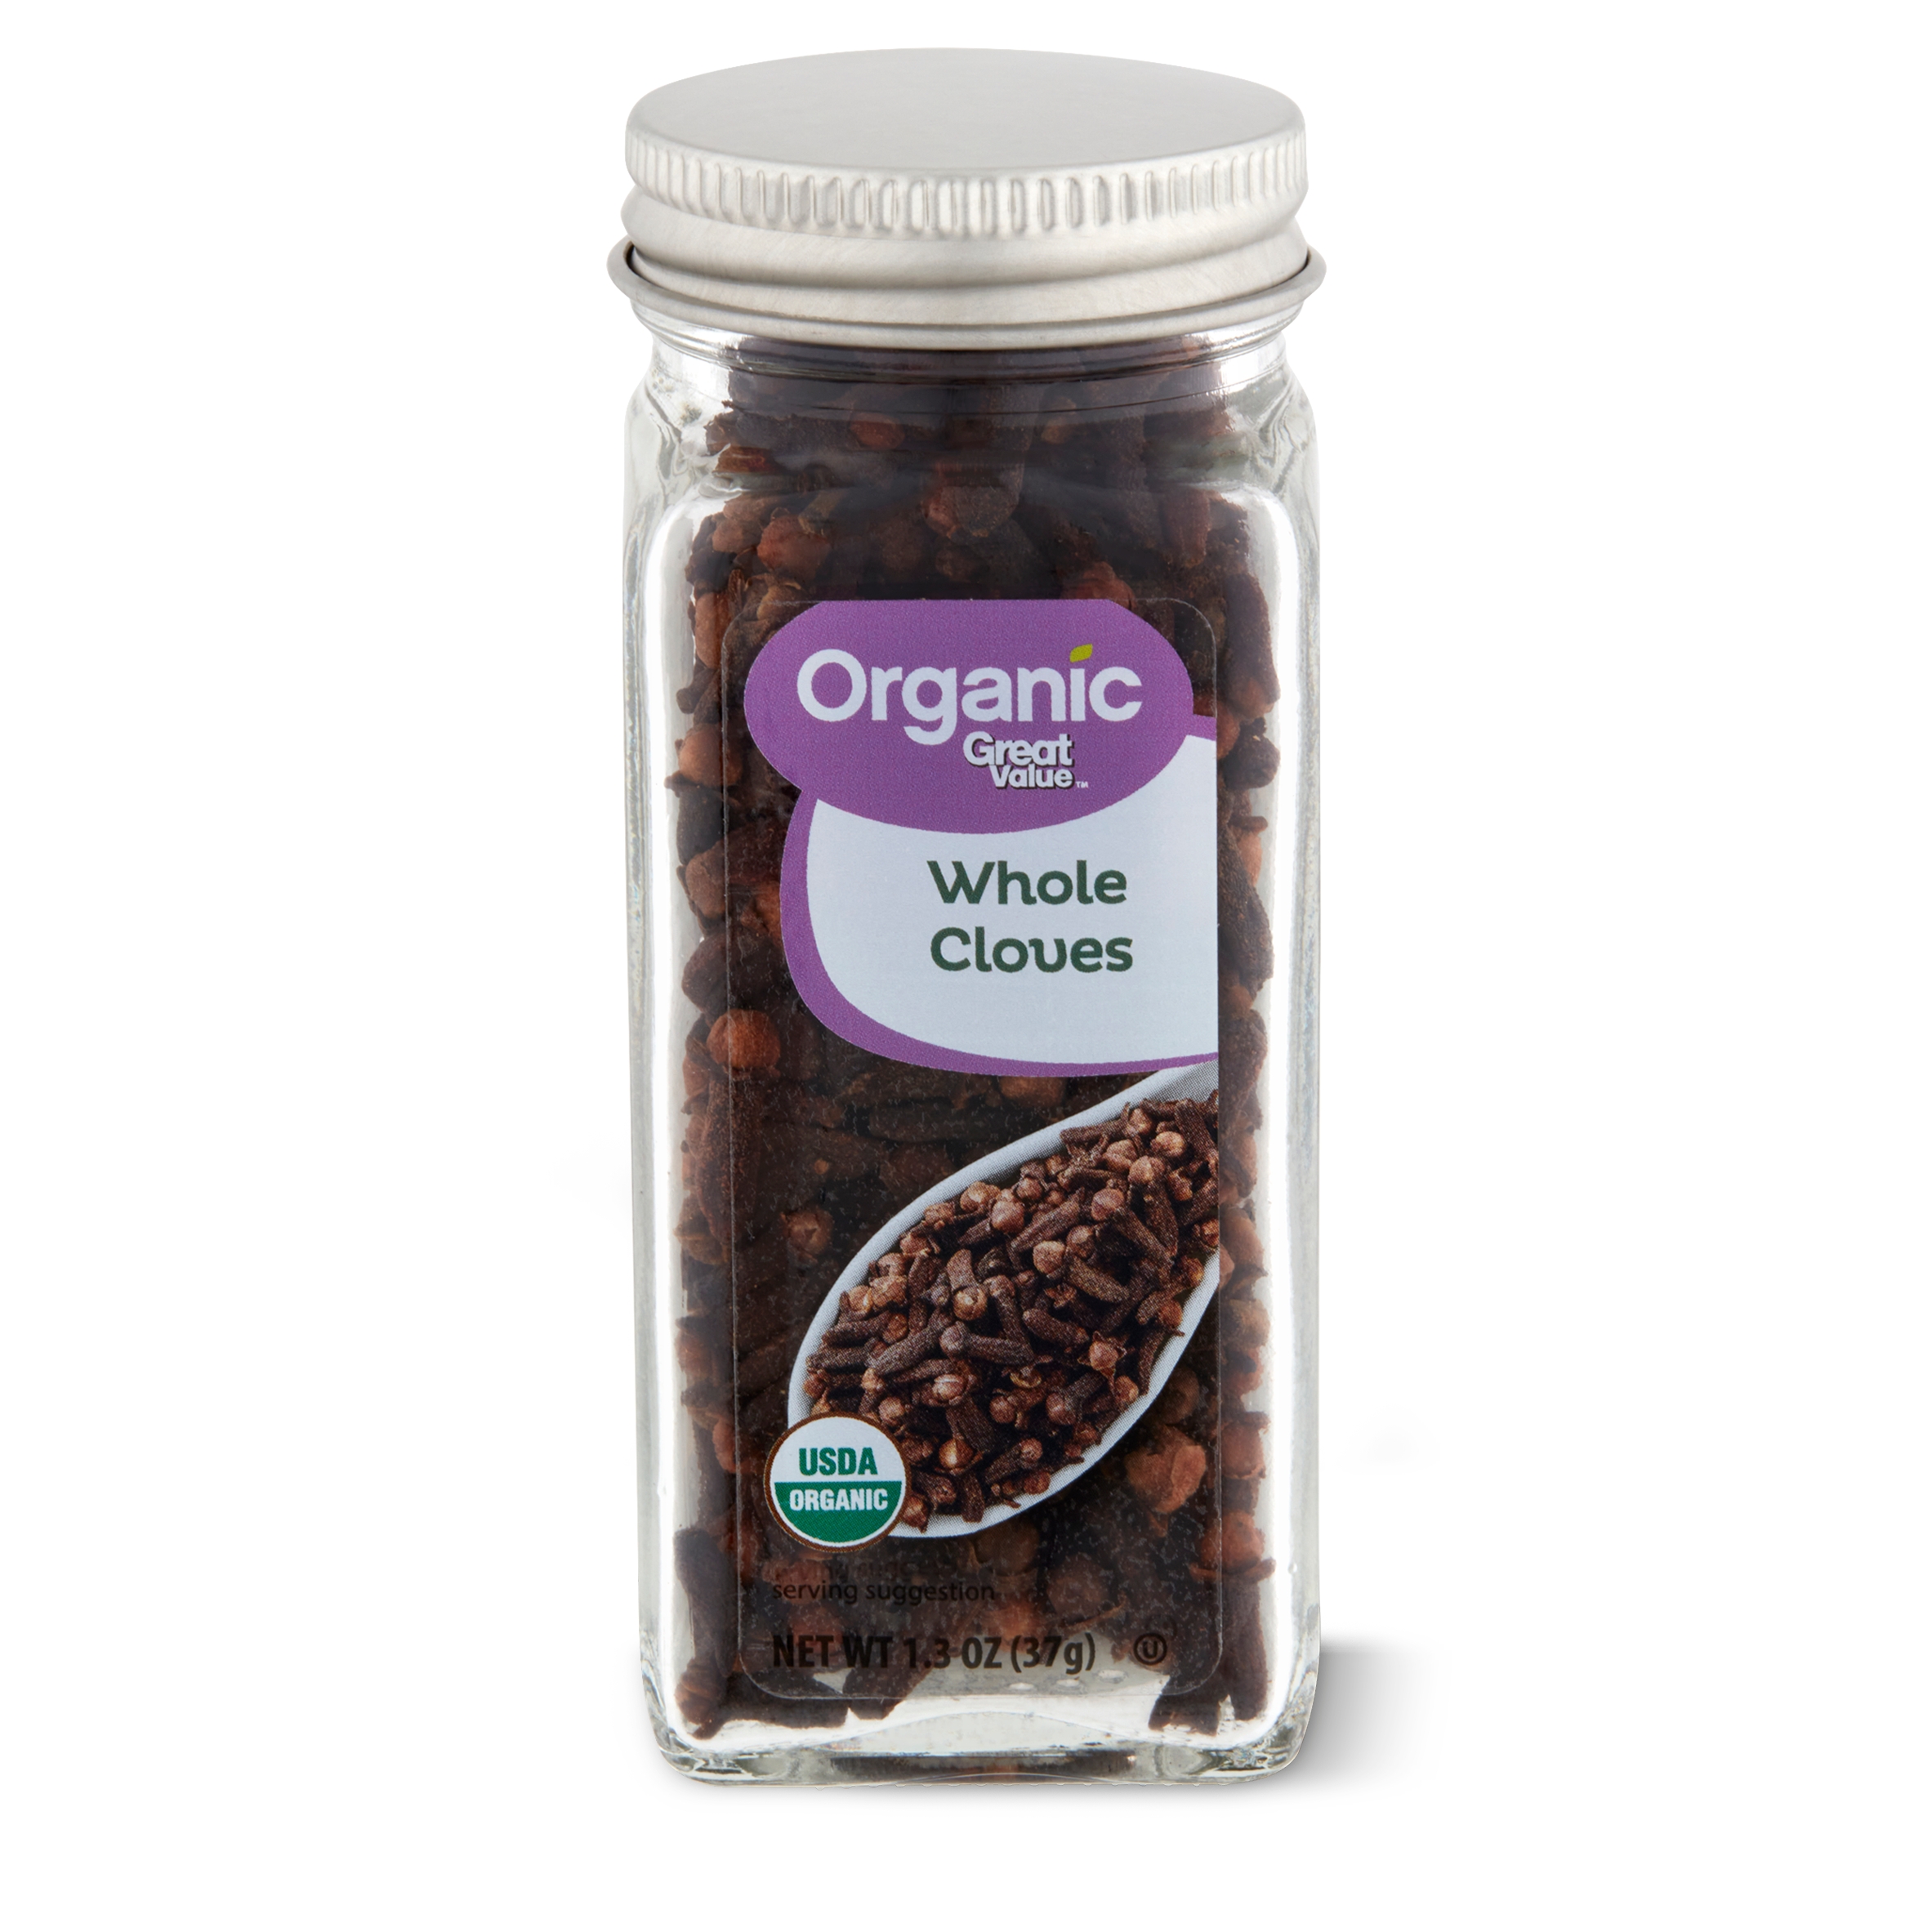 Great Value Organic Whole Cloves, 1.3 oz - image 5 of 10